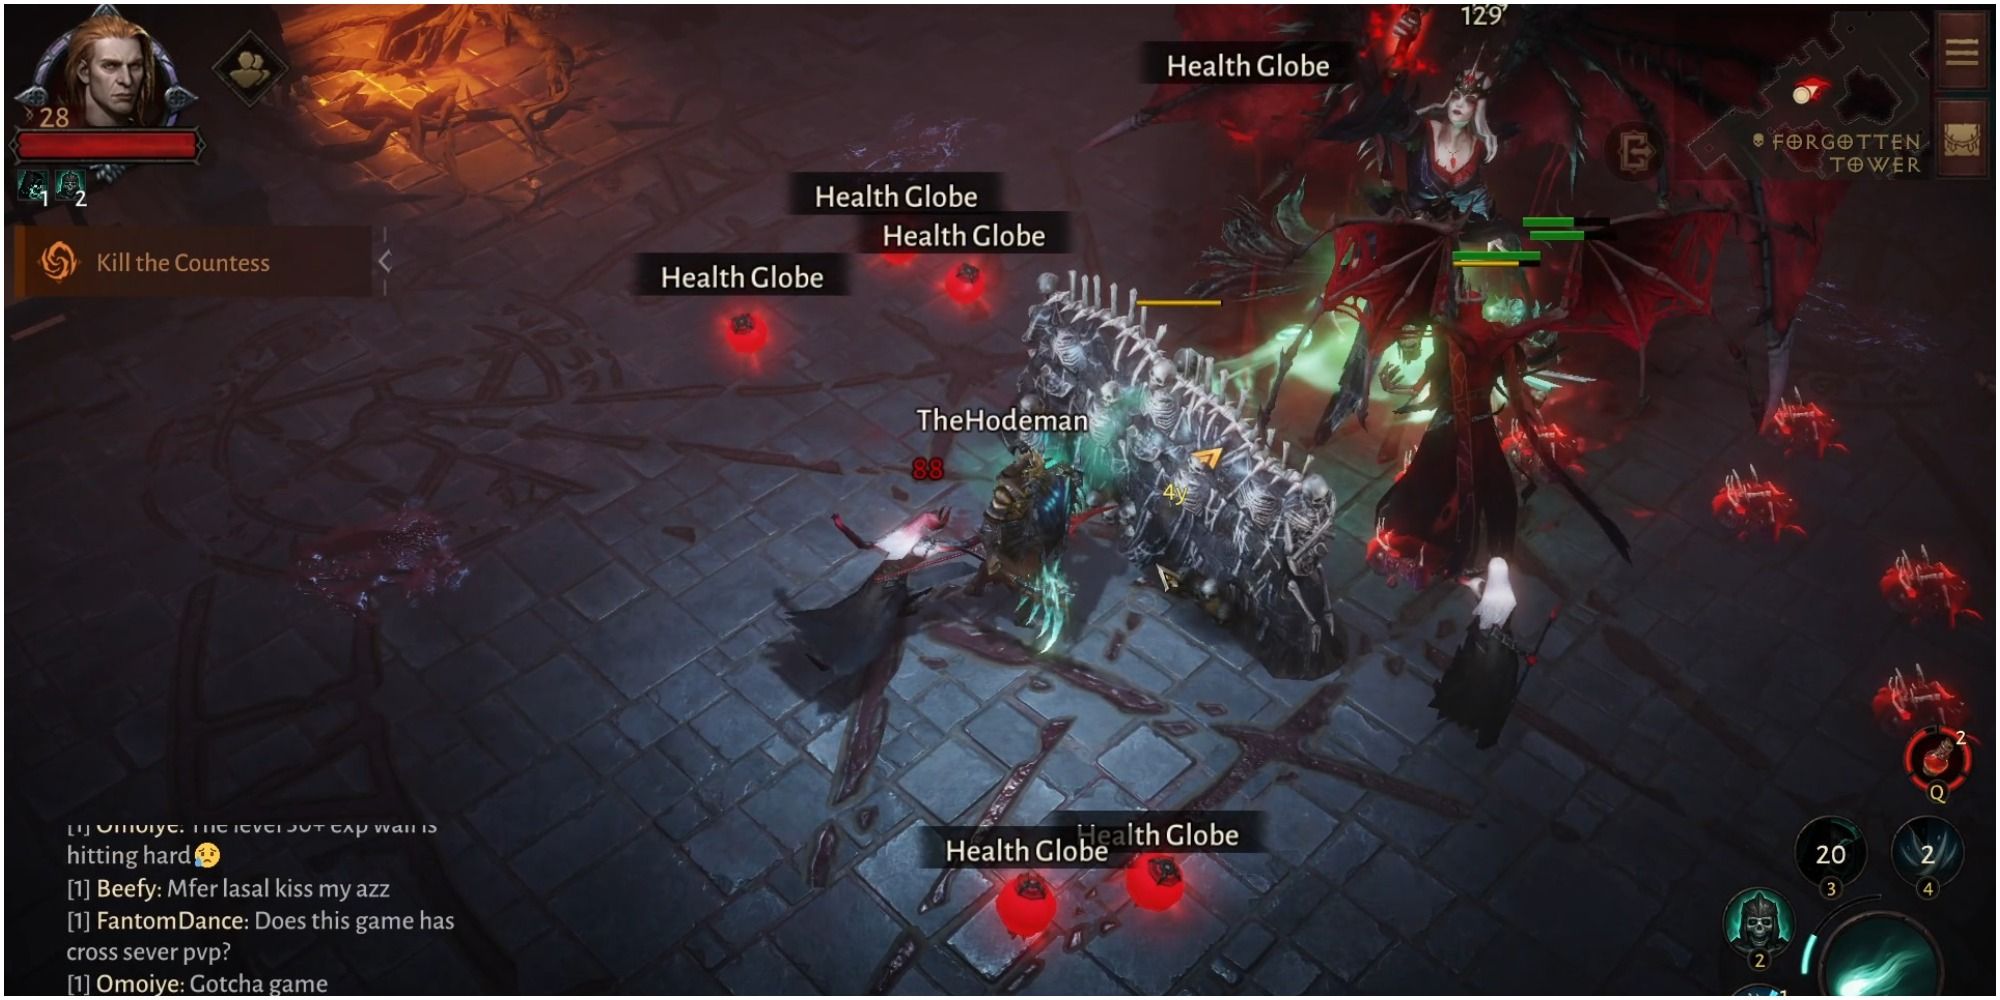 Diablo Immortal Boss Fight With The Countess